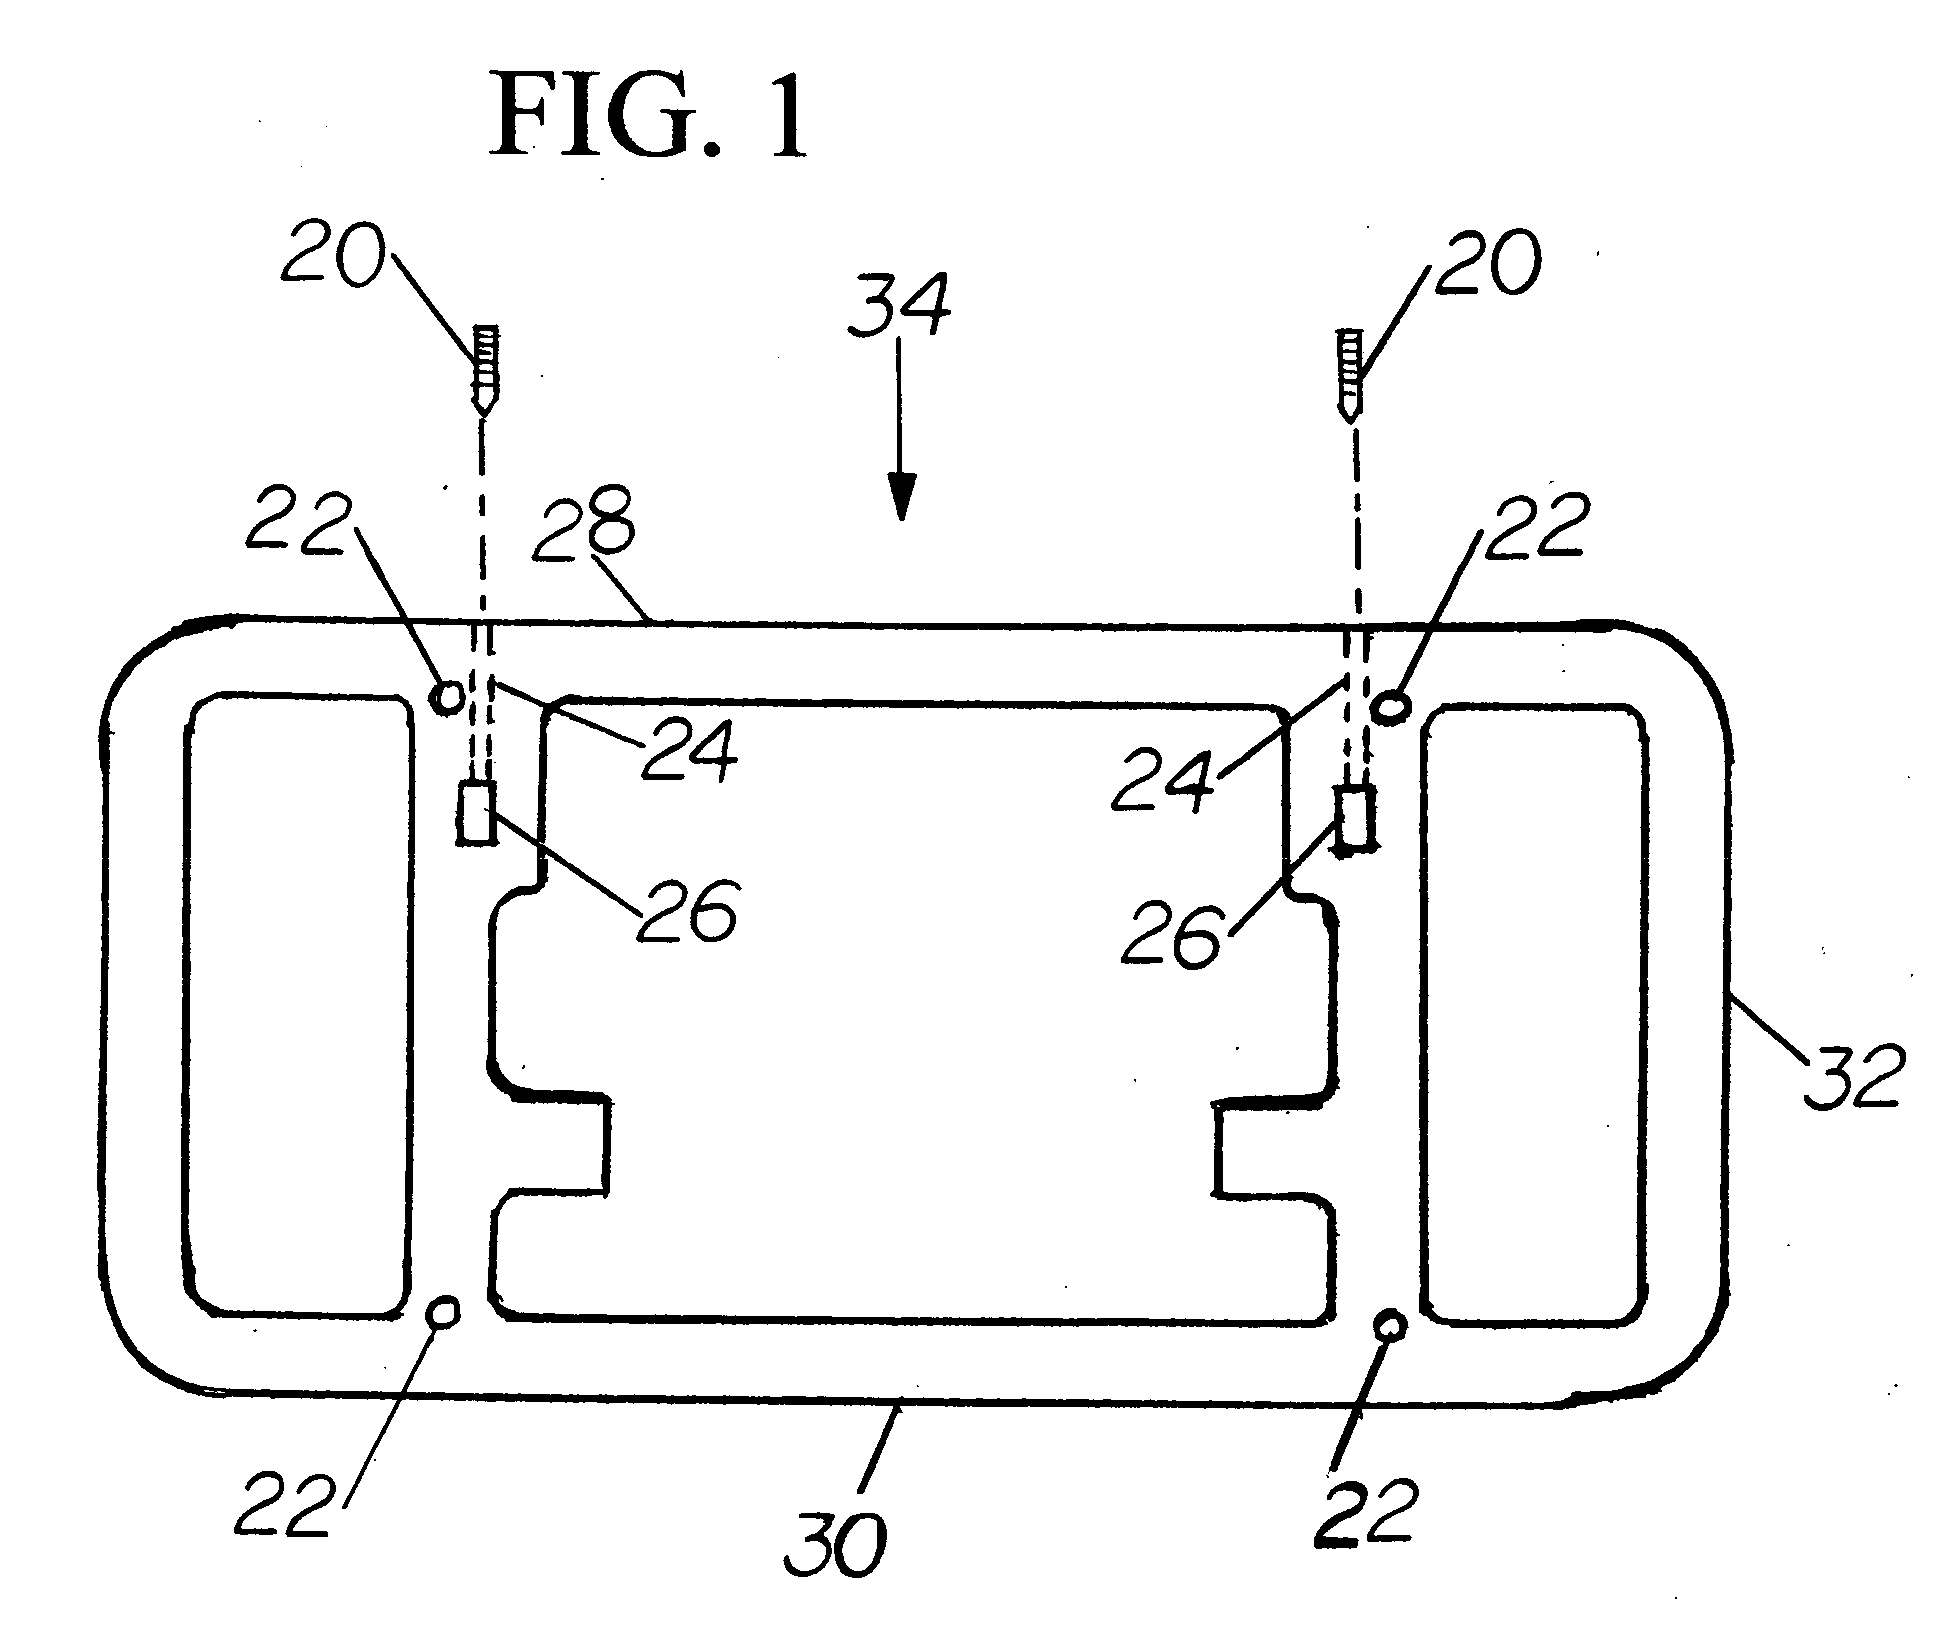 Bracket with detachable body for mounting a front license plate to an automotive vehicle